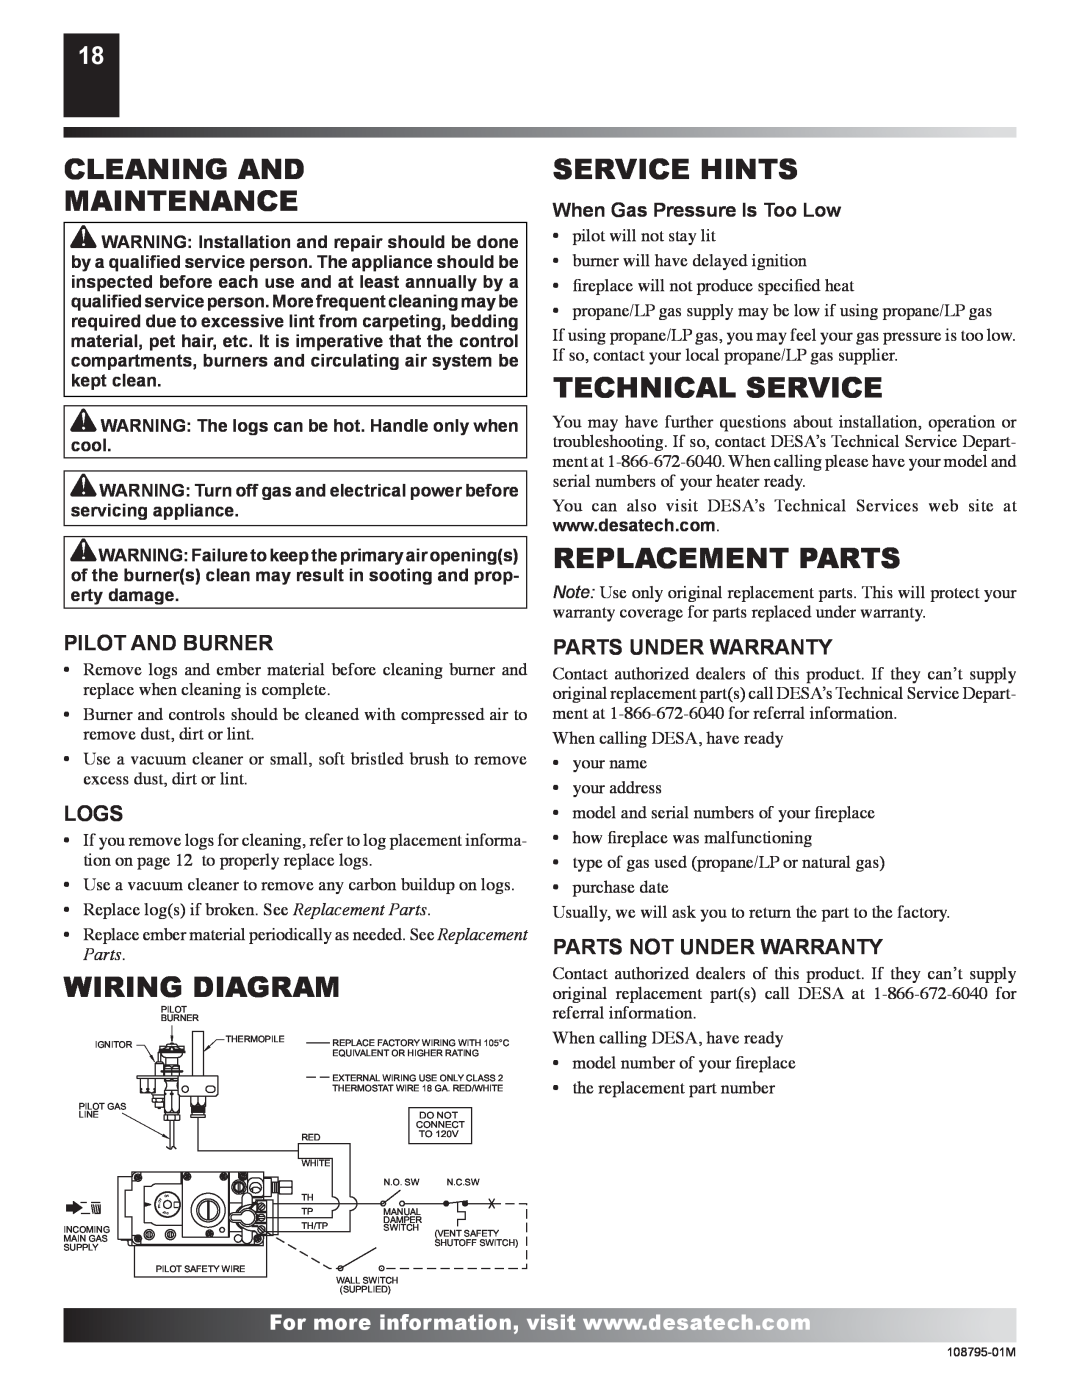 Desa H) AND VM42P(B, M36P Cleaning And Maintenance, Service Hints, Technical Service, Replacement Parts, Wiring Diagram 